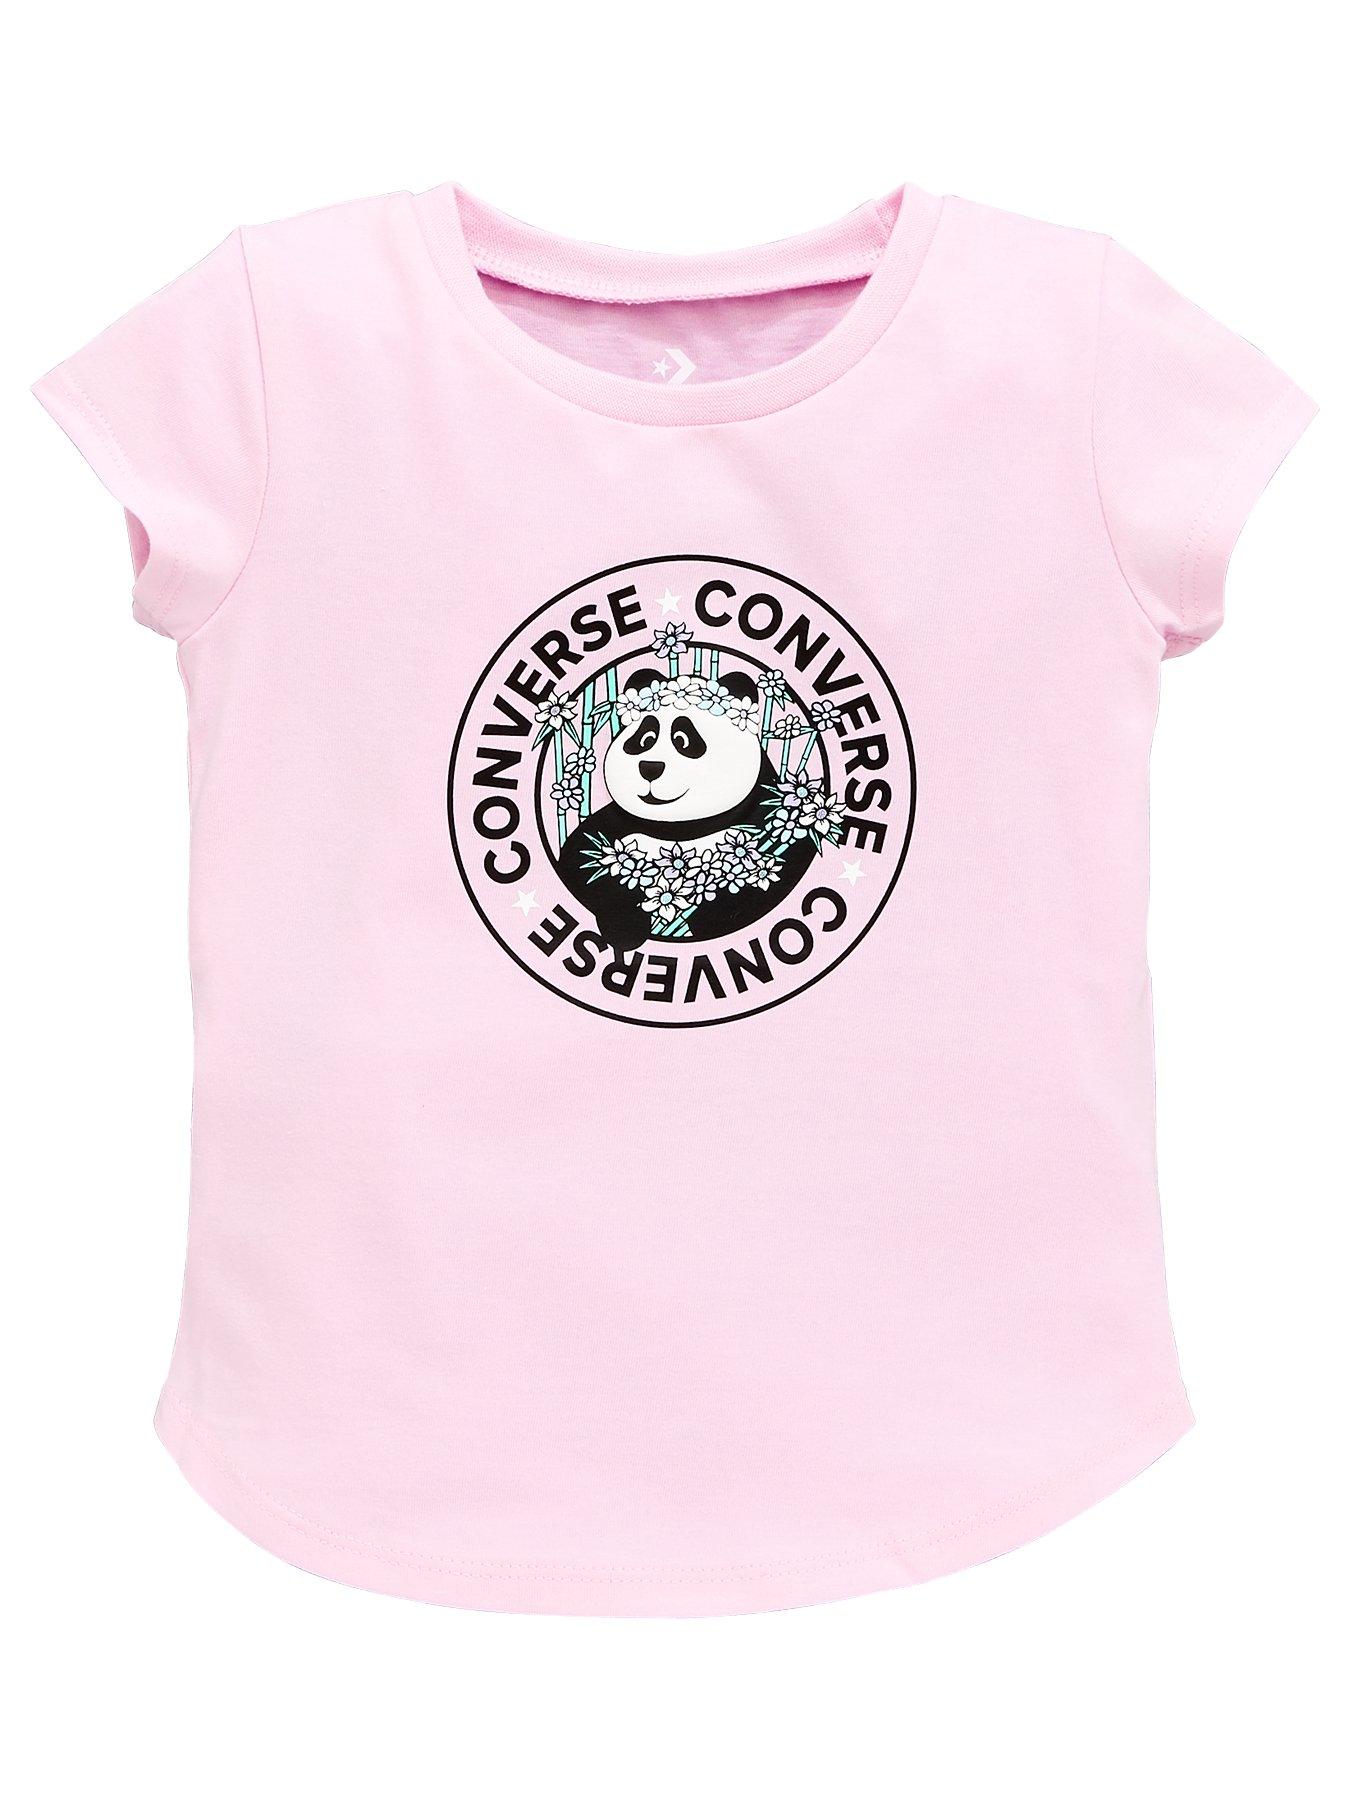 converse uk baby clothes